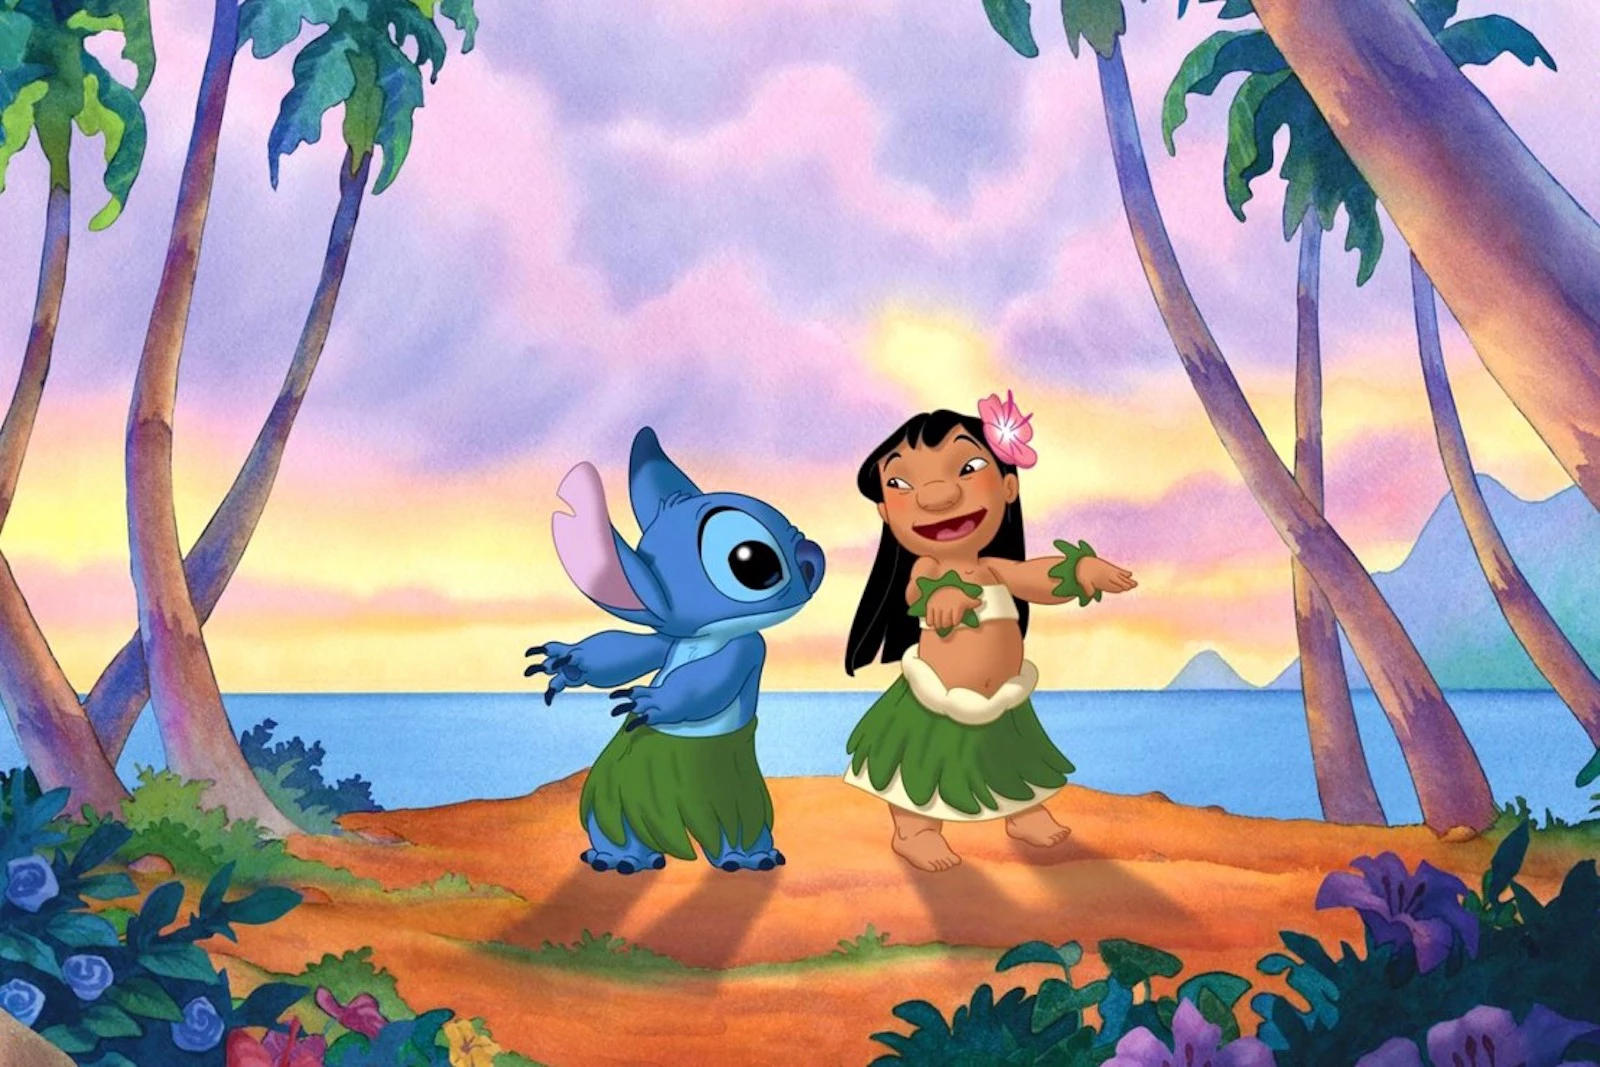 Alien”-nated: The 20th Anniversary of “Lilo & Stitch” – Animation Scoop